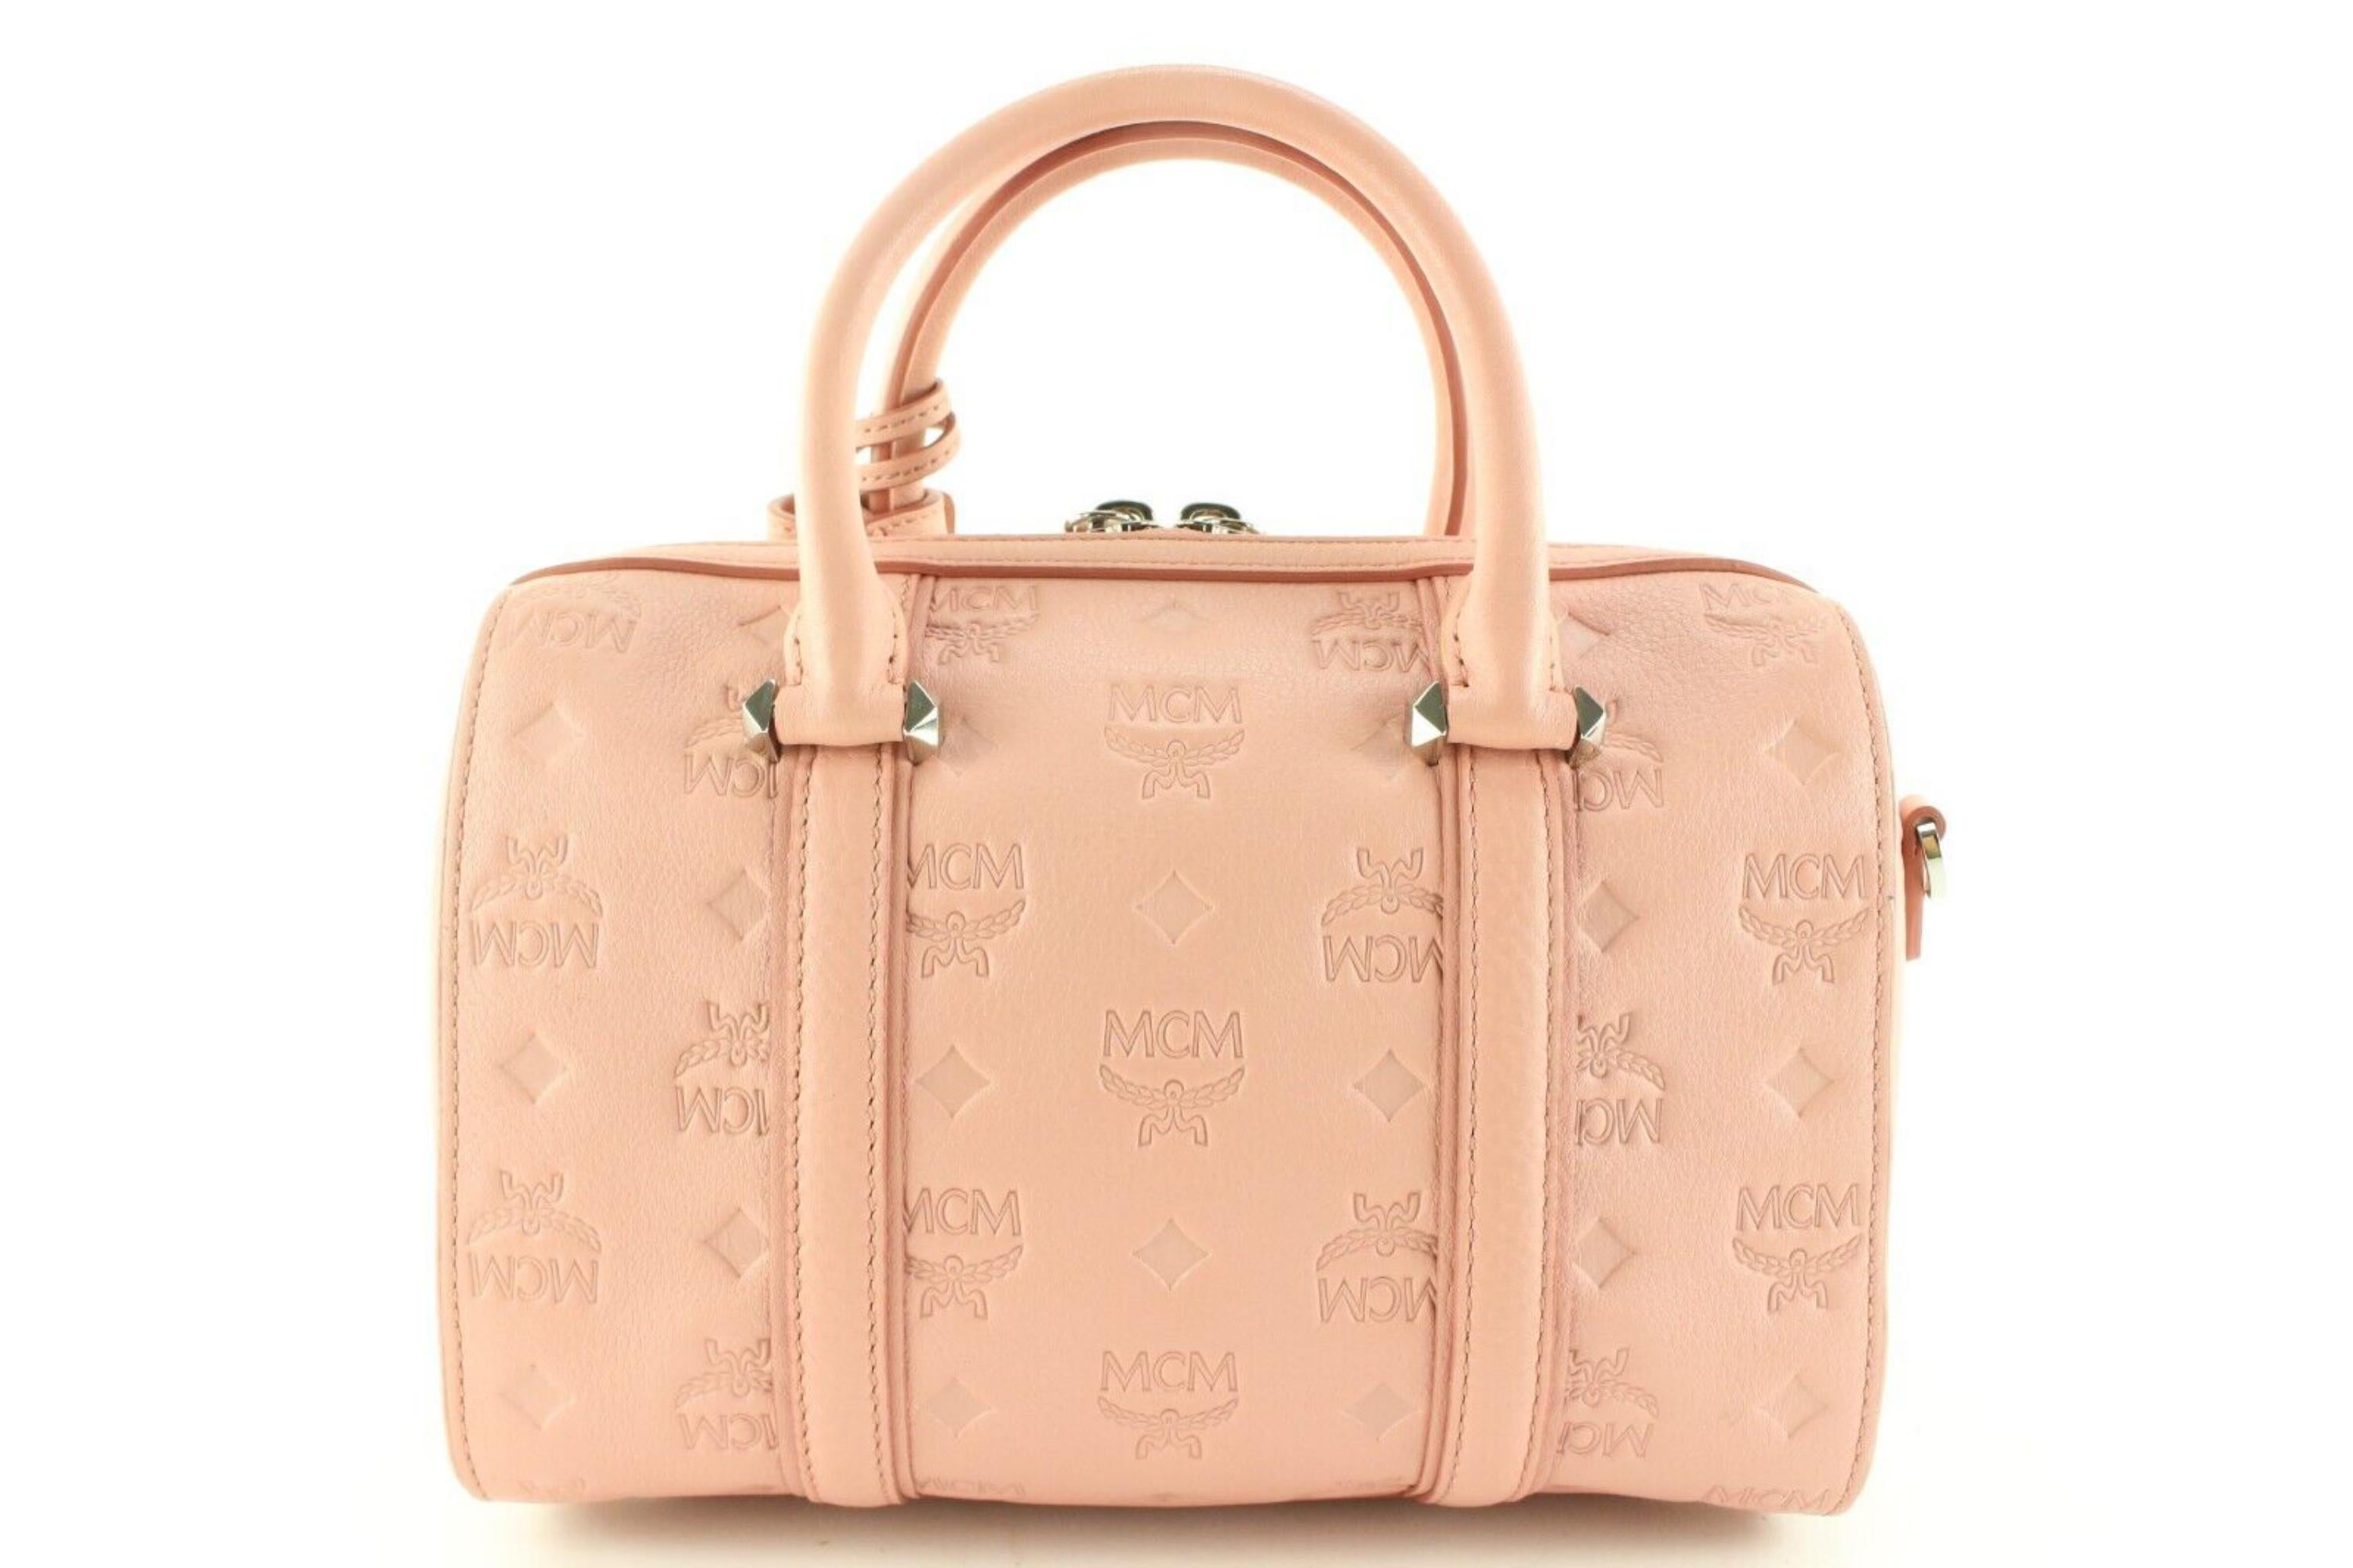 MCM Pink Blush Embossed Leather Boston Bag with Strap 1MCM0502 6